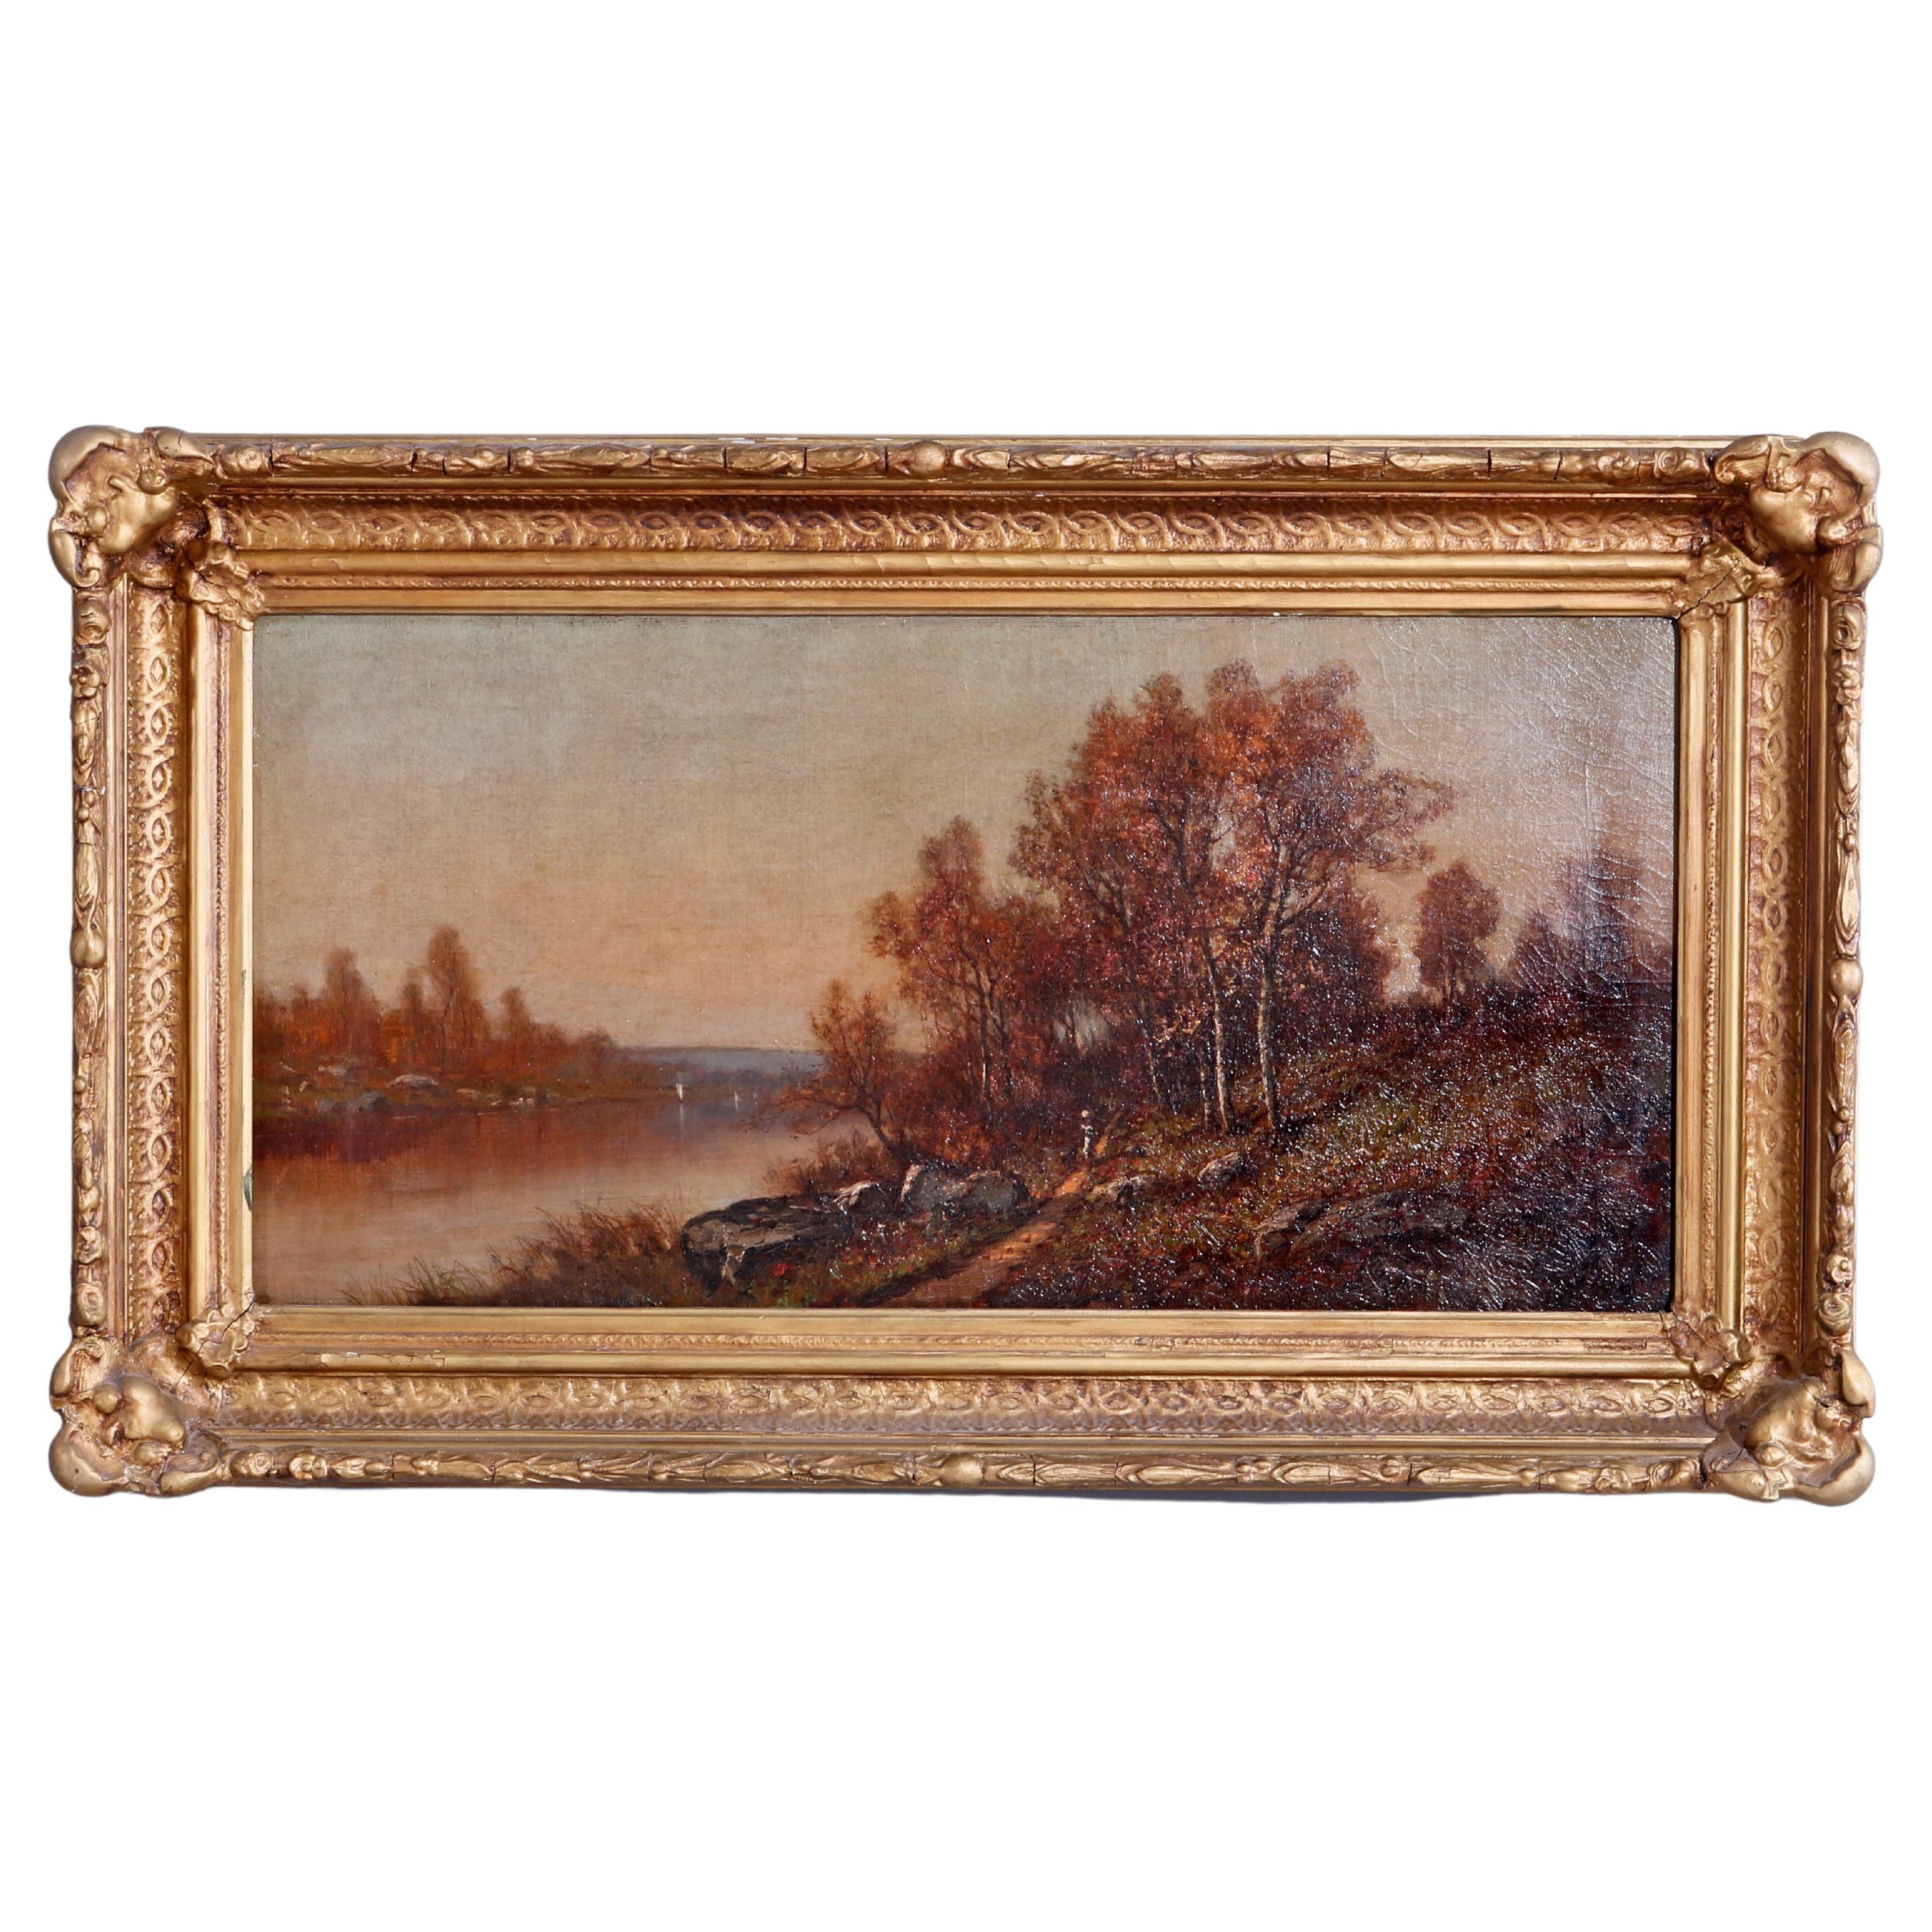 Antique Landscape Painting, Autumn on the Patomac River, Signed Max Weyl, 19thC